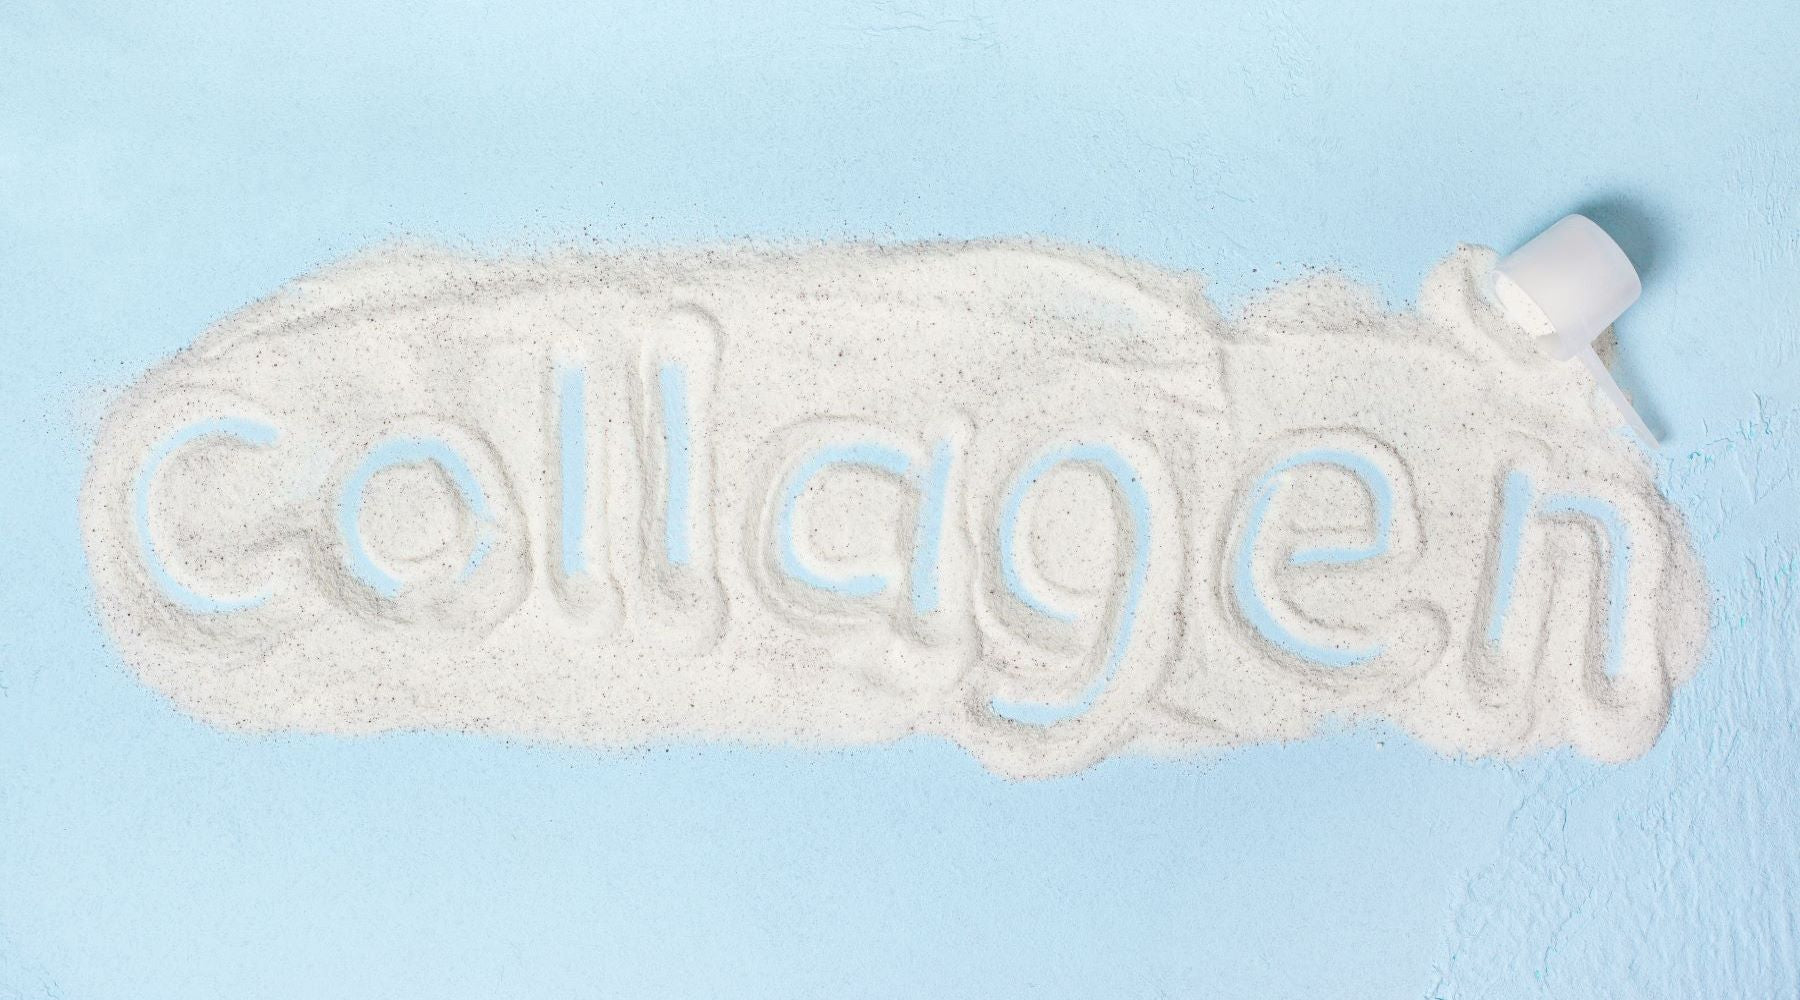 The benefits of taking Collagen supplements explained